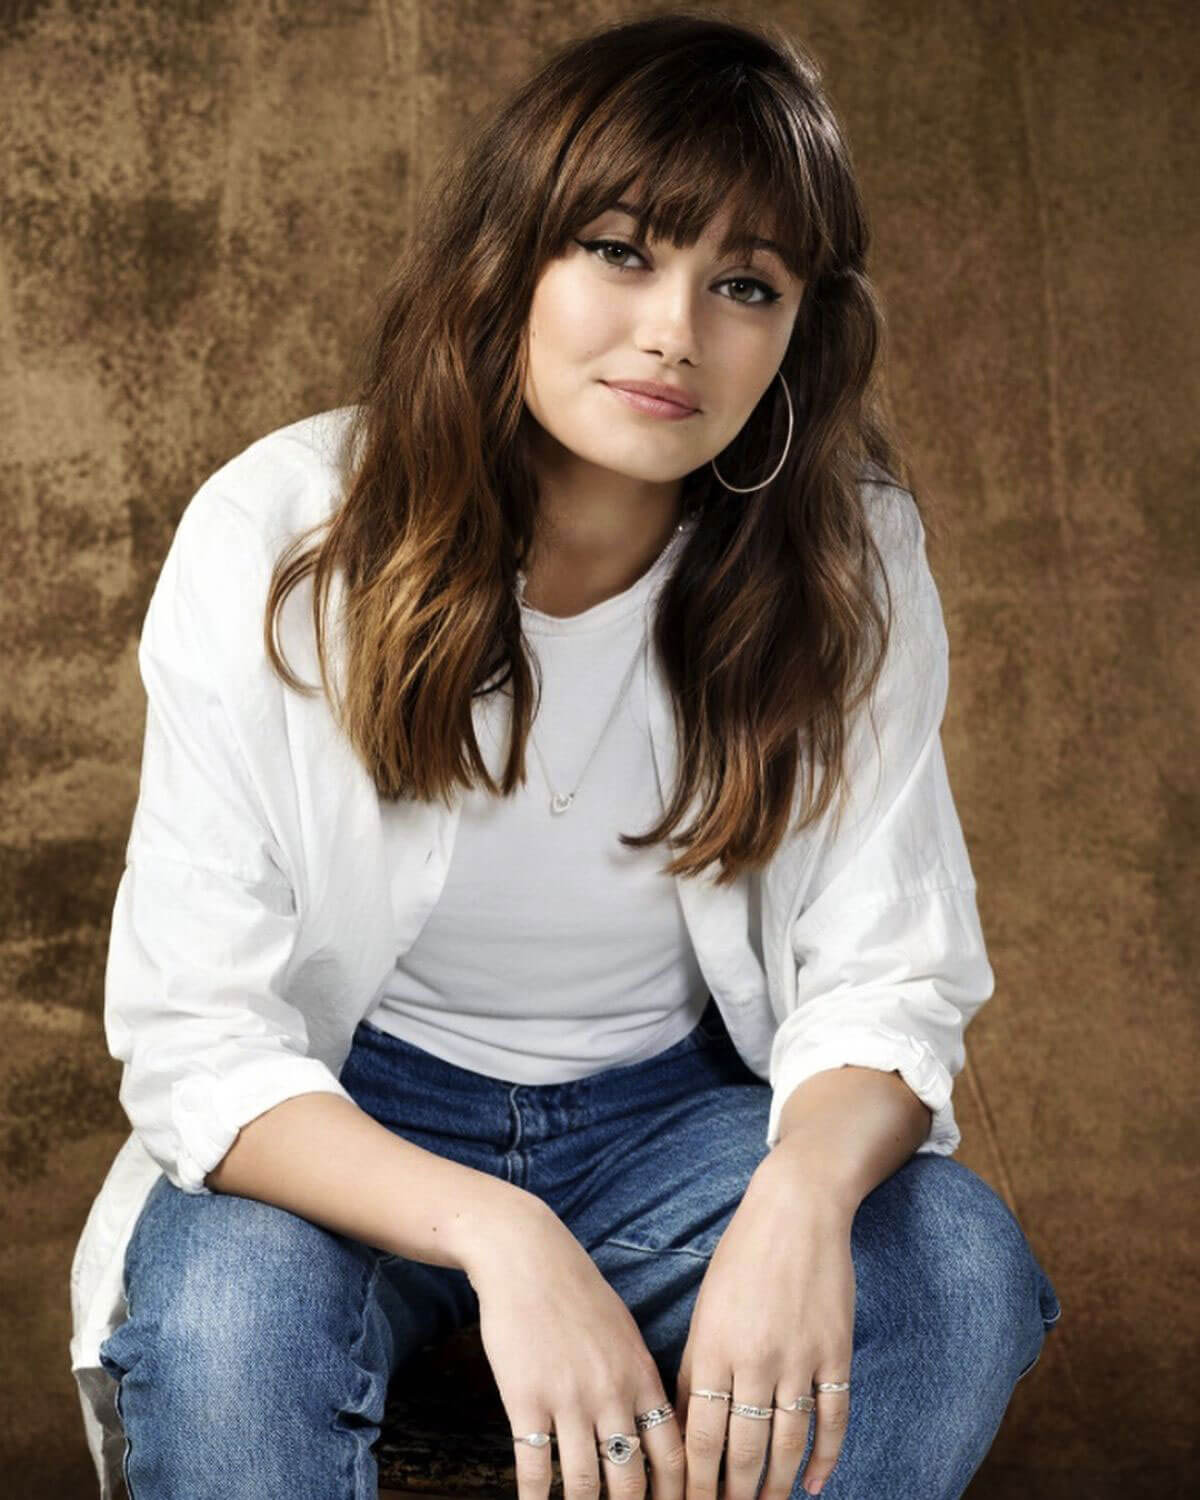 Ella Purnell Poses for Thewrap, May 2018 Issue